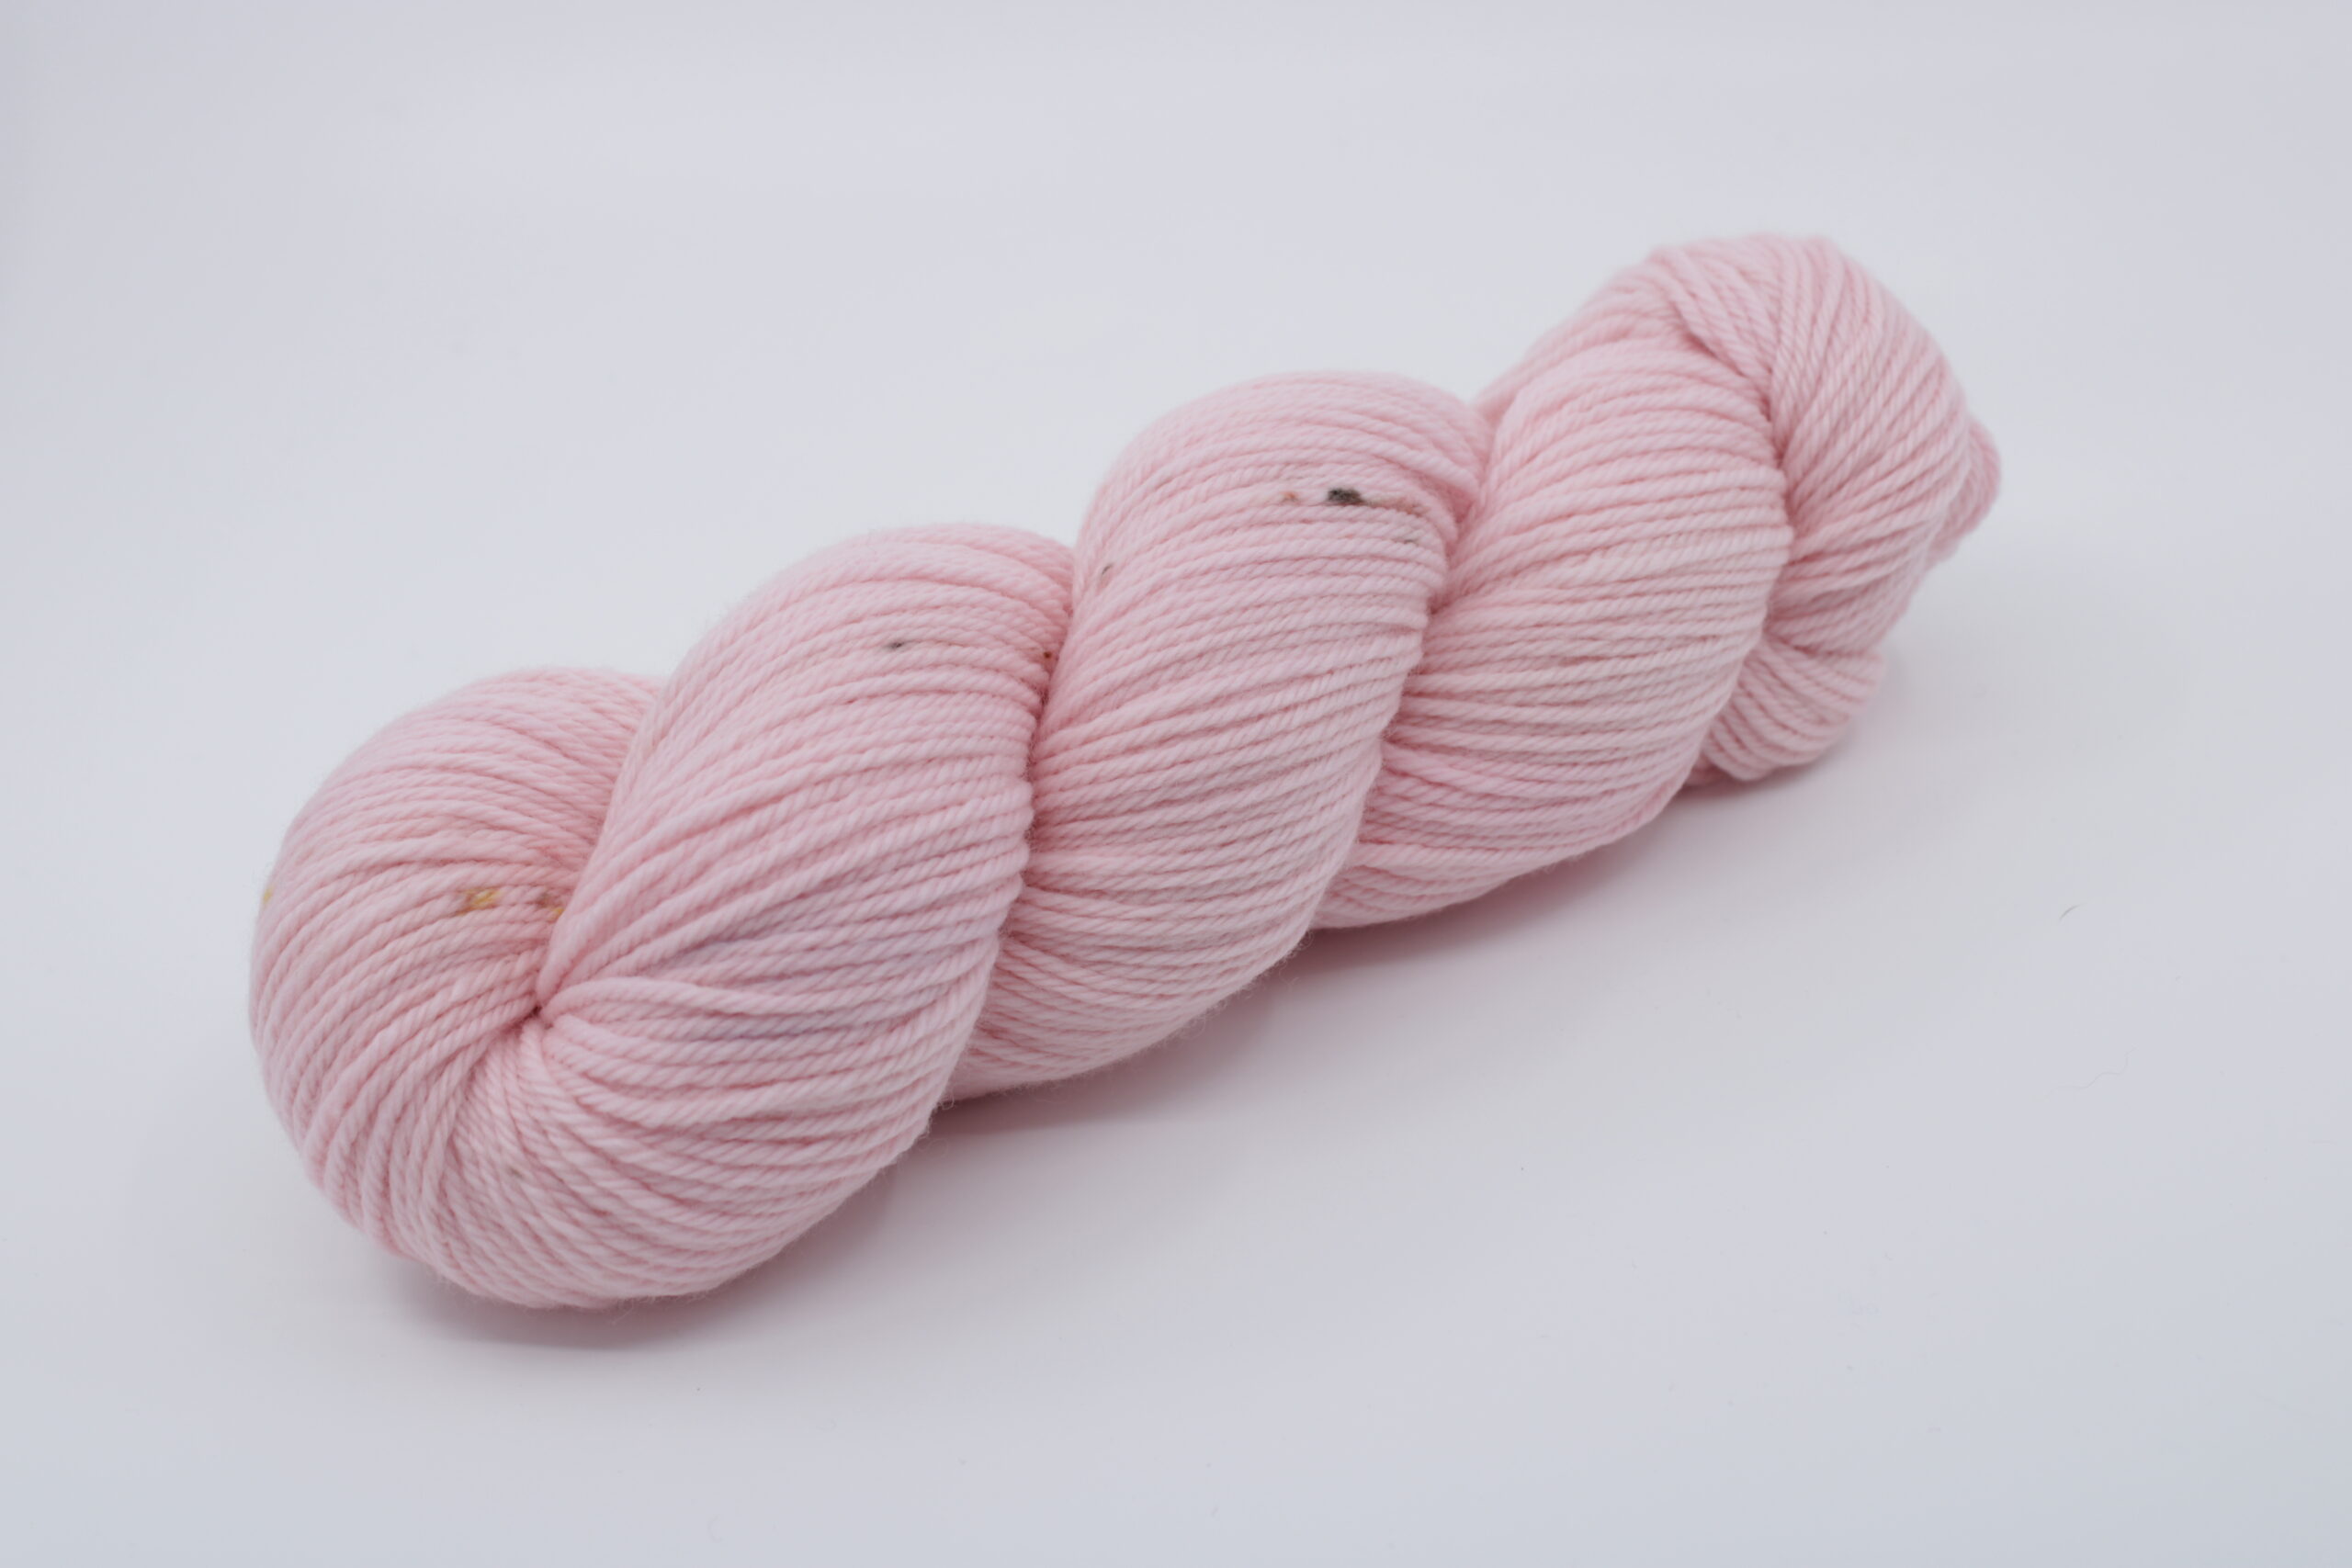 Fibrani wool, base: Flocon DK. 100% untreated merino wool, pink color with small speckles Color: OOAK